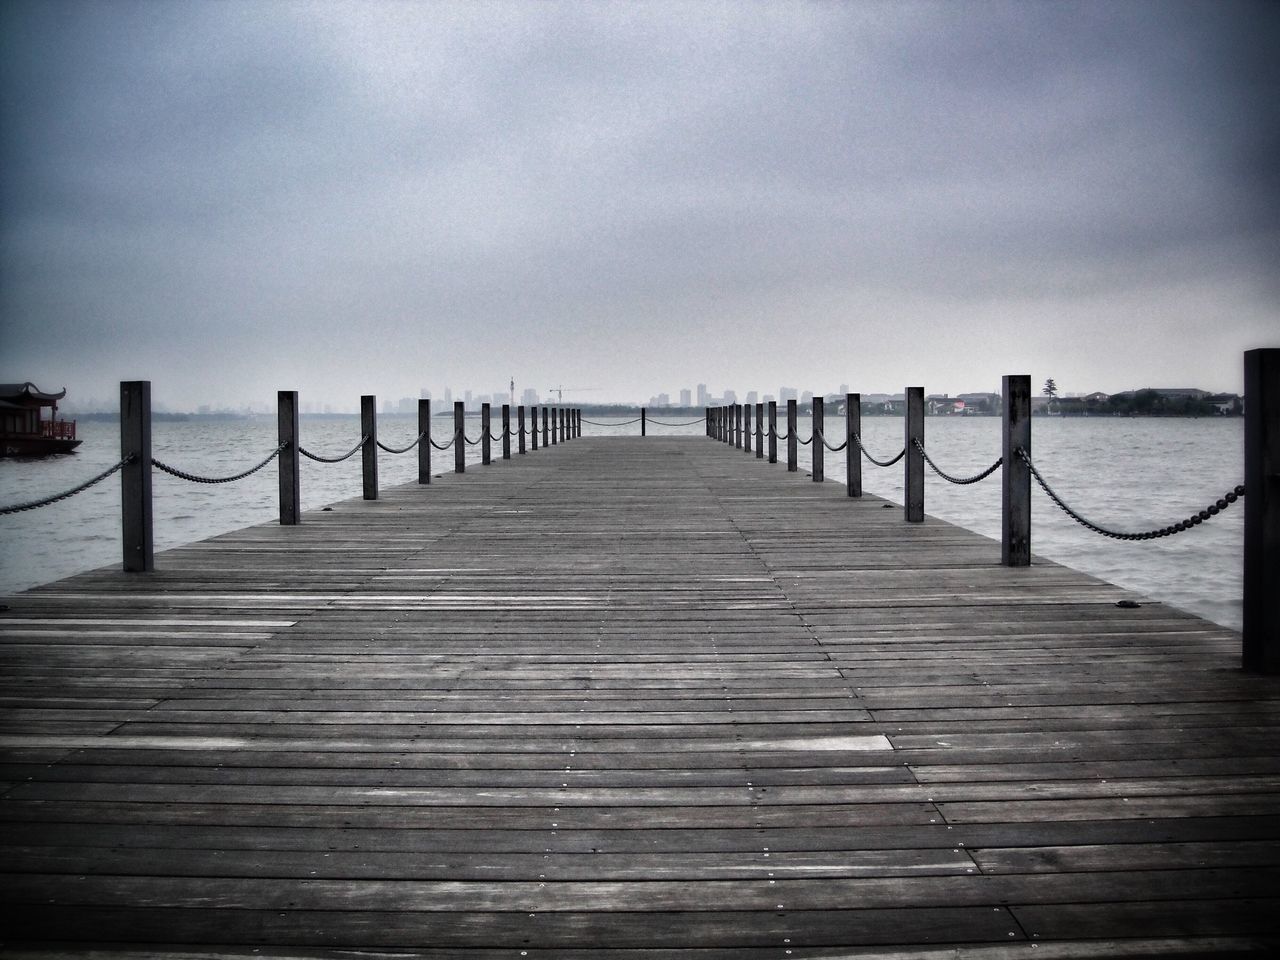 pier, the way forward, wood - material, water, tranquil scene, sky, railing, tranquility, sea, boardwalk, jetty, diminishing perspective, wooden, scenics, wood, nature, wooden post, long, beauty in nature, fence